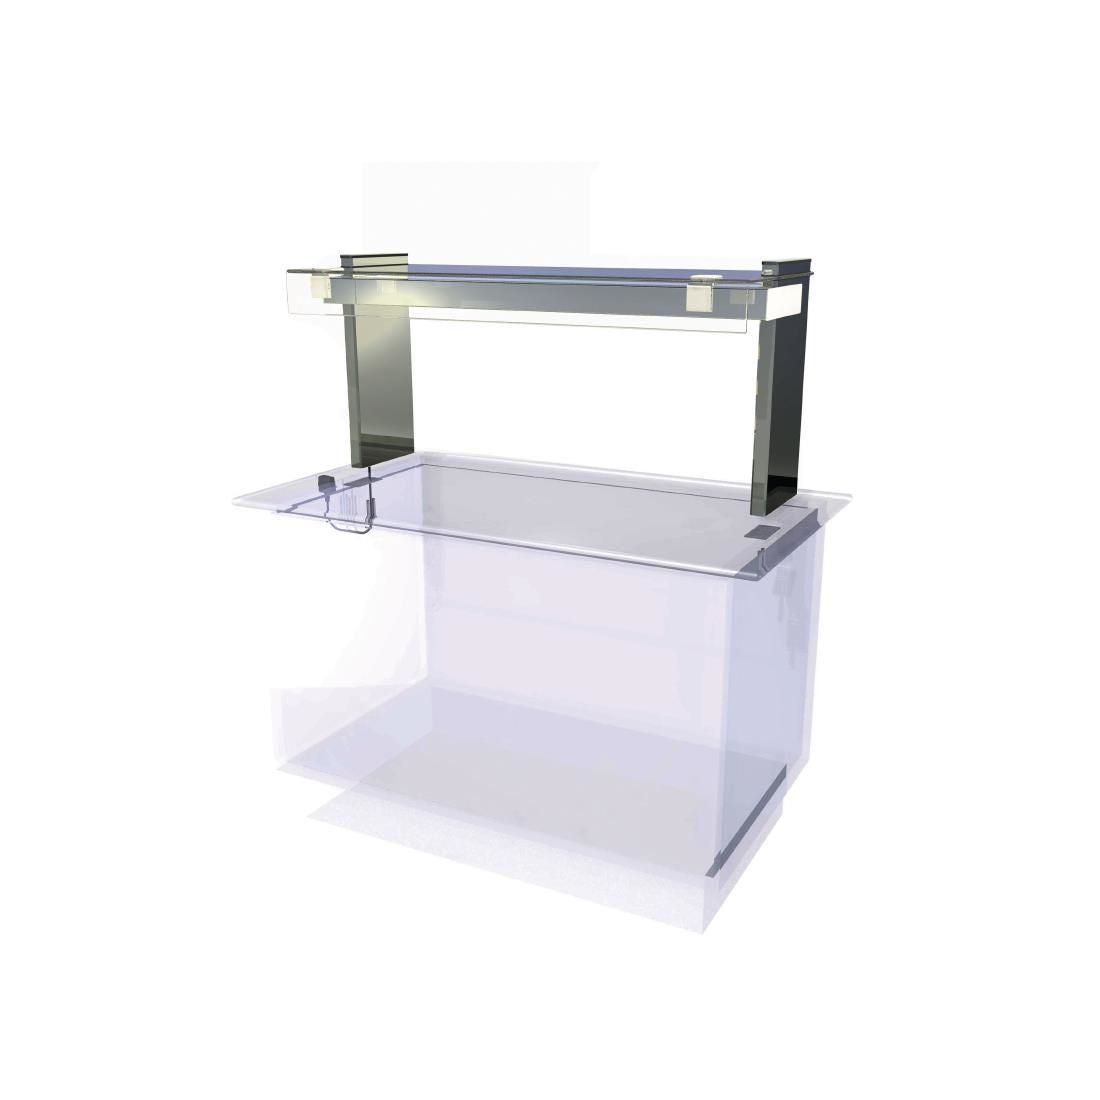 CW621 Kubus Drop In Ambient Display KAG3 JD Catering Equipment Solutions Ltd